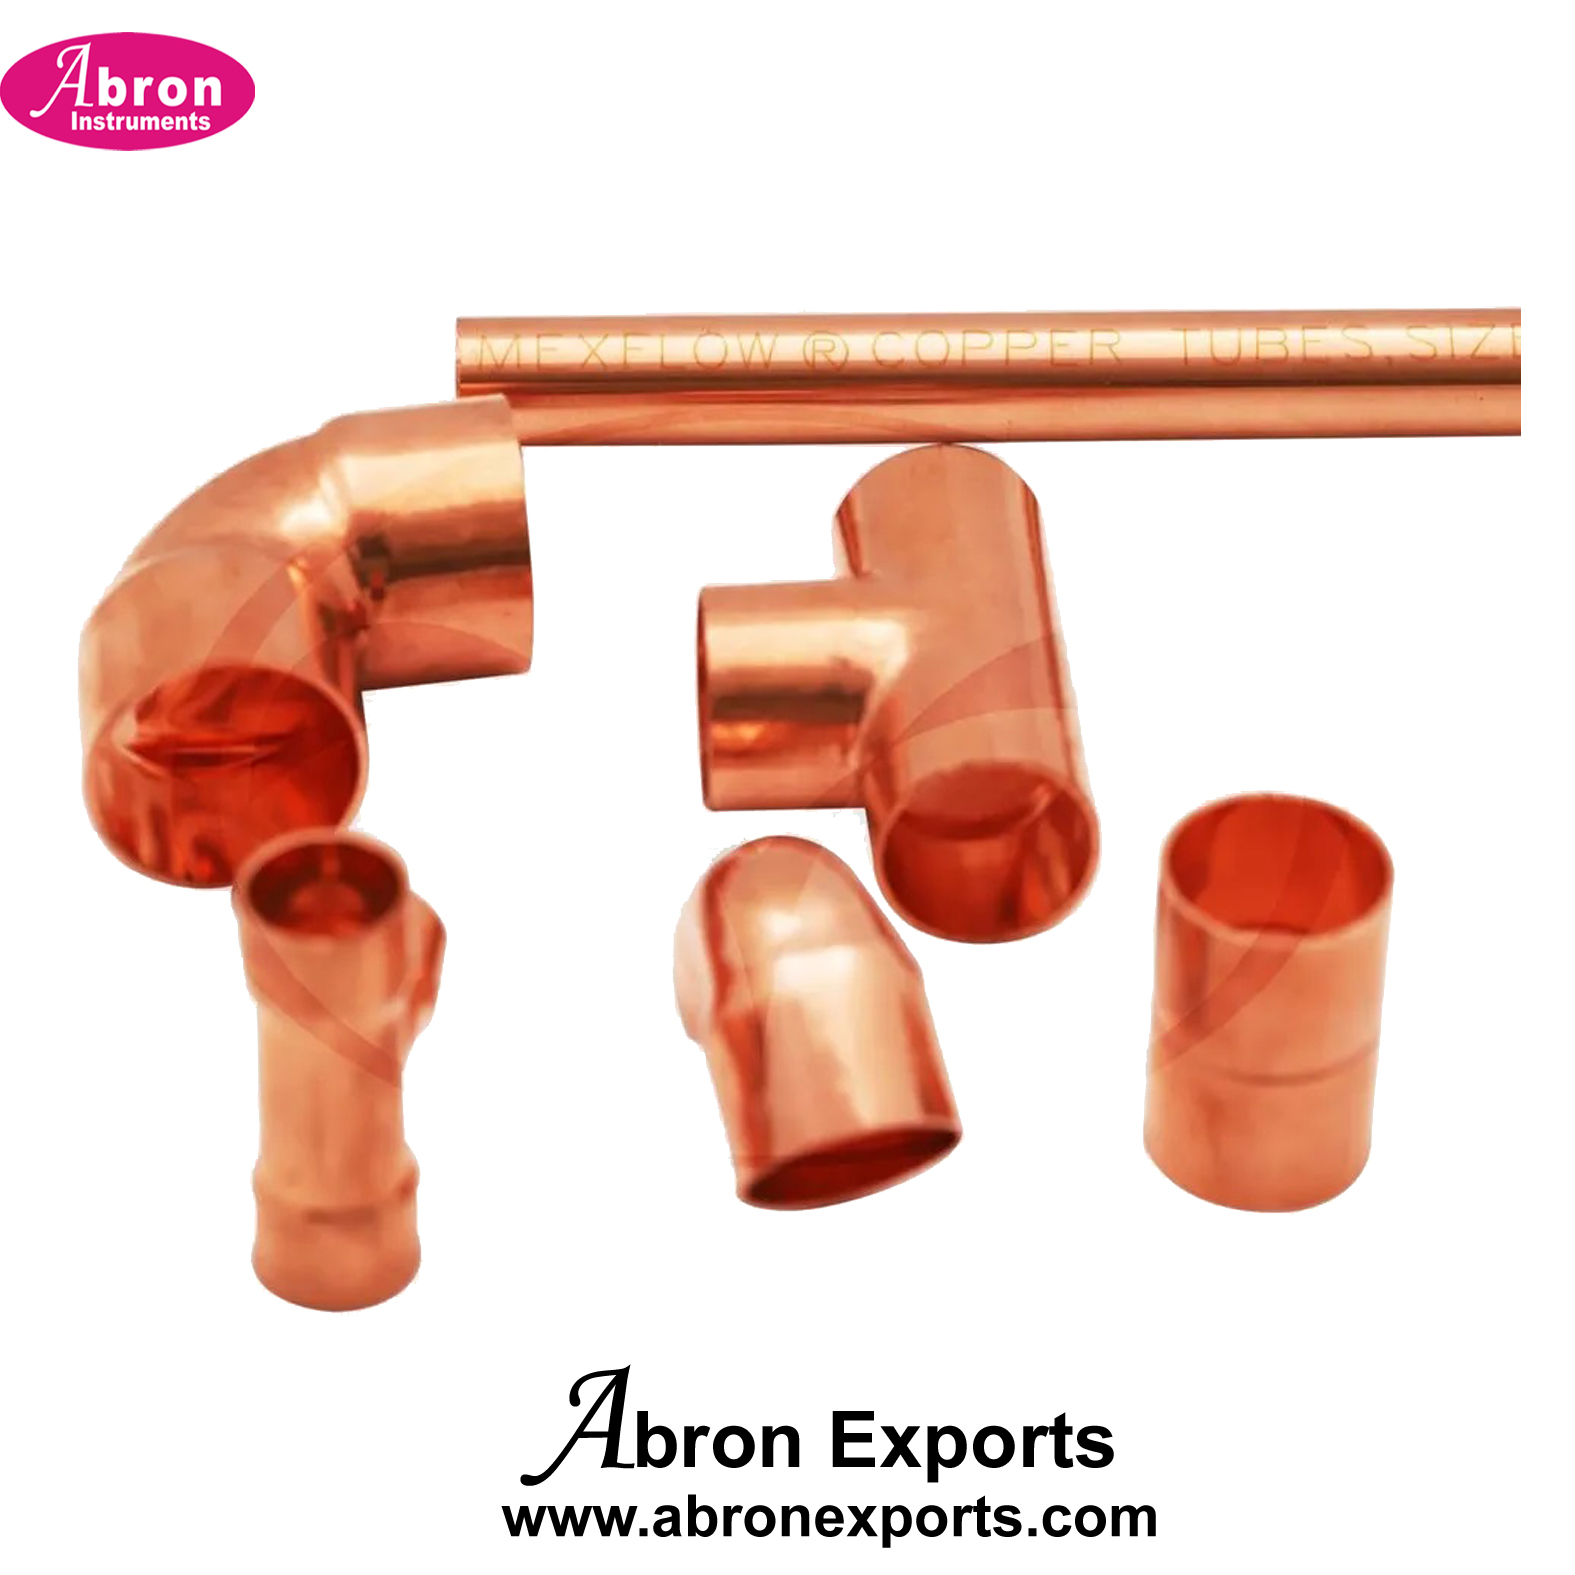 Medical gas Pipe Line spare Set Tee Elbo Coupler reducer set copper 15mm or 22mm Pack of 100 each Abron ABM-1121PK22 